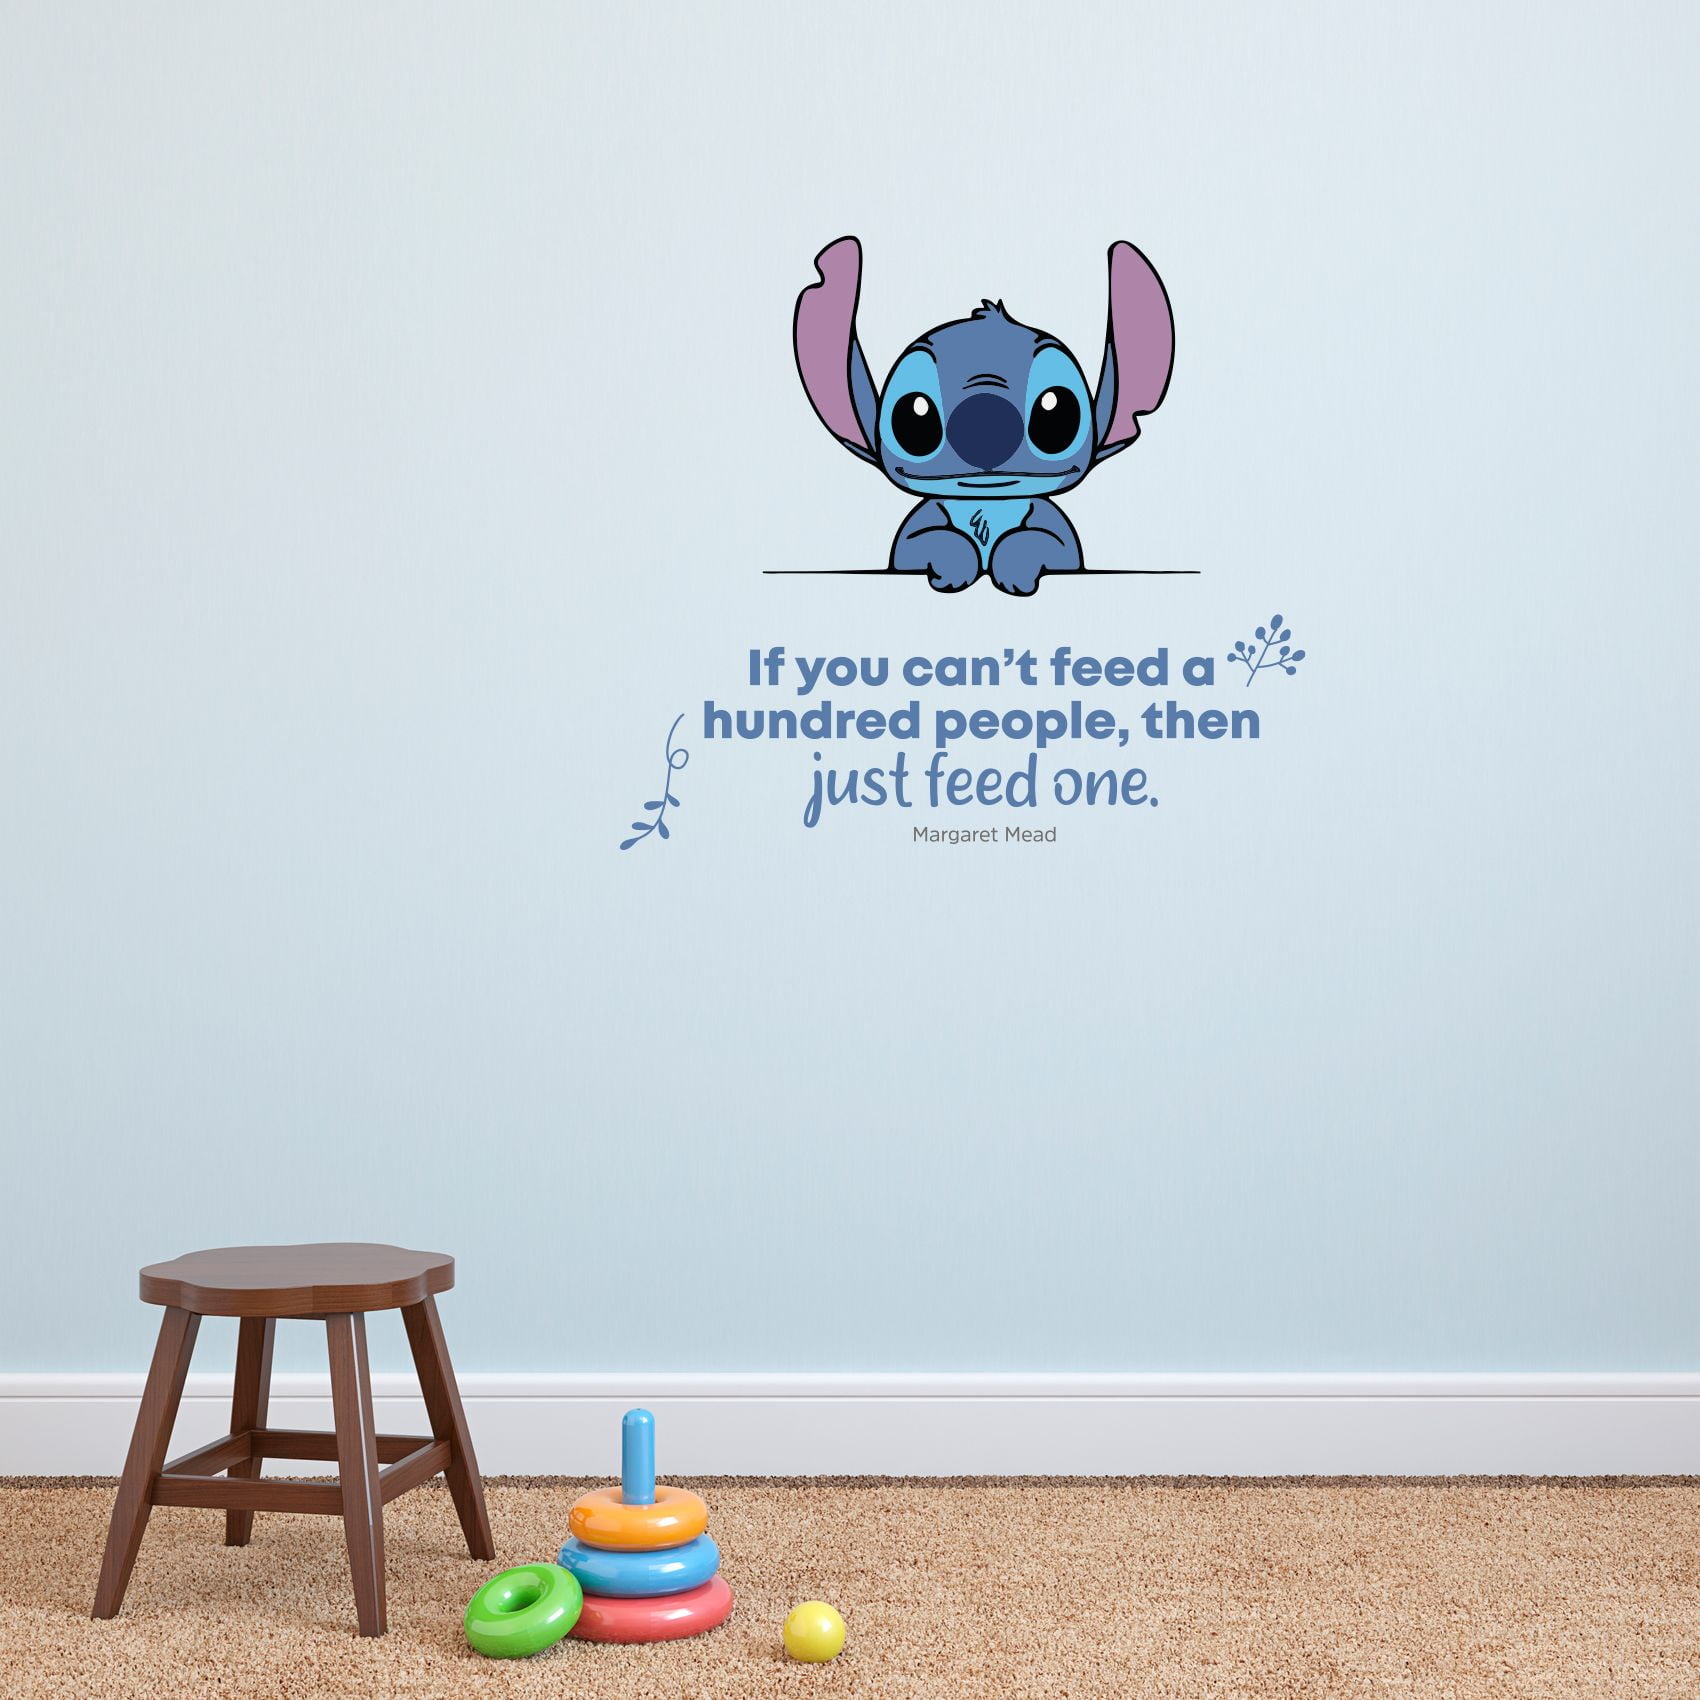 Lilo And Stitch Cartoon Ohana Means Family Quote Quotes Kids Children's Wall Decal Decals Sticker Stickers Bedroom Room Walls Rooms Decor